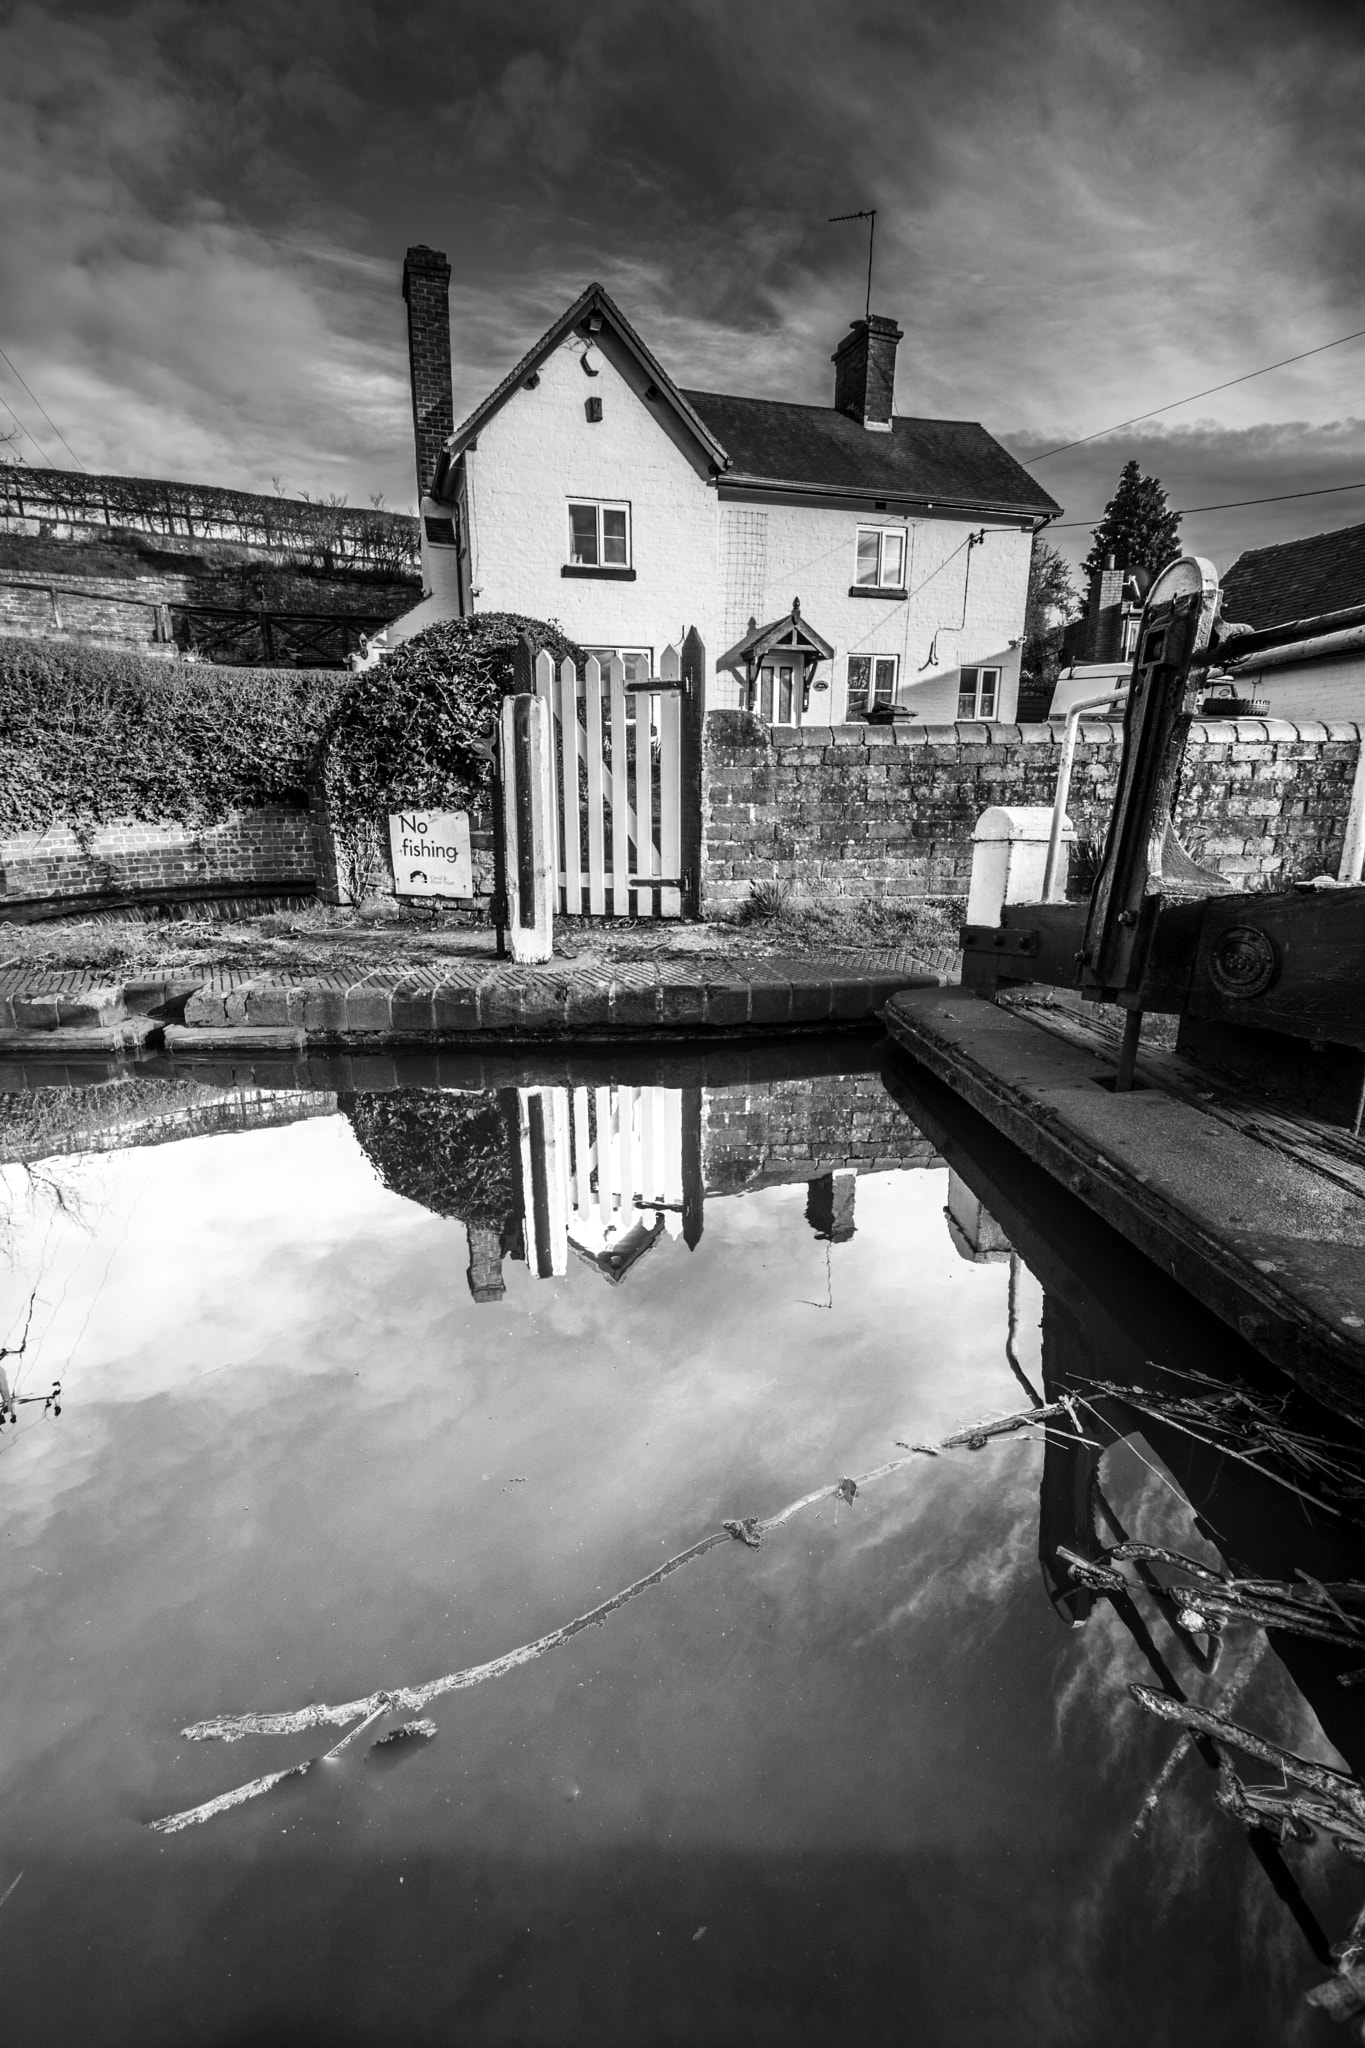 Nikon D5200 + Tamron SP AF 10-24mm F3.5-4.5 Di II LD Aspherical (IF) sample photo. Lock keepers cottage b&w photography